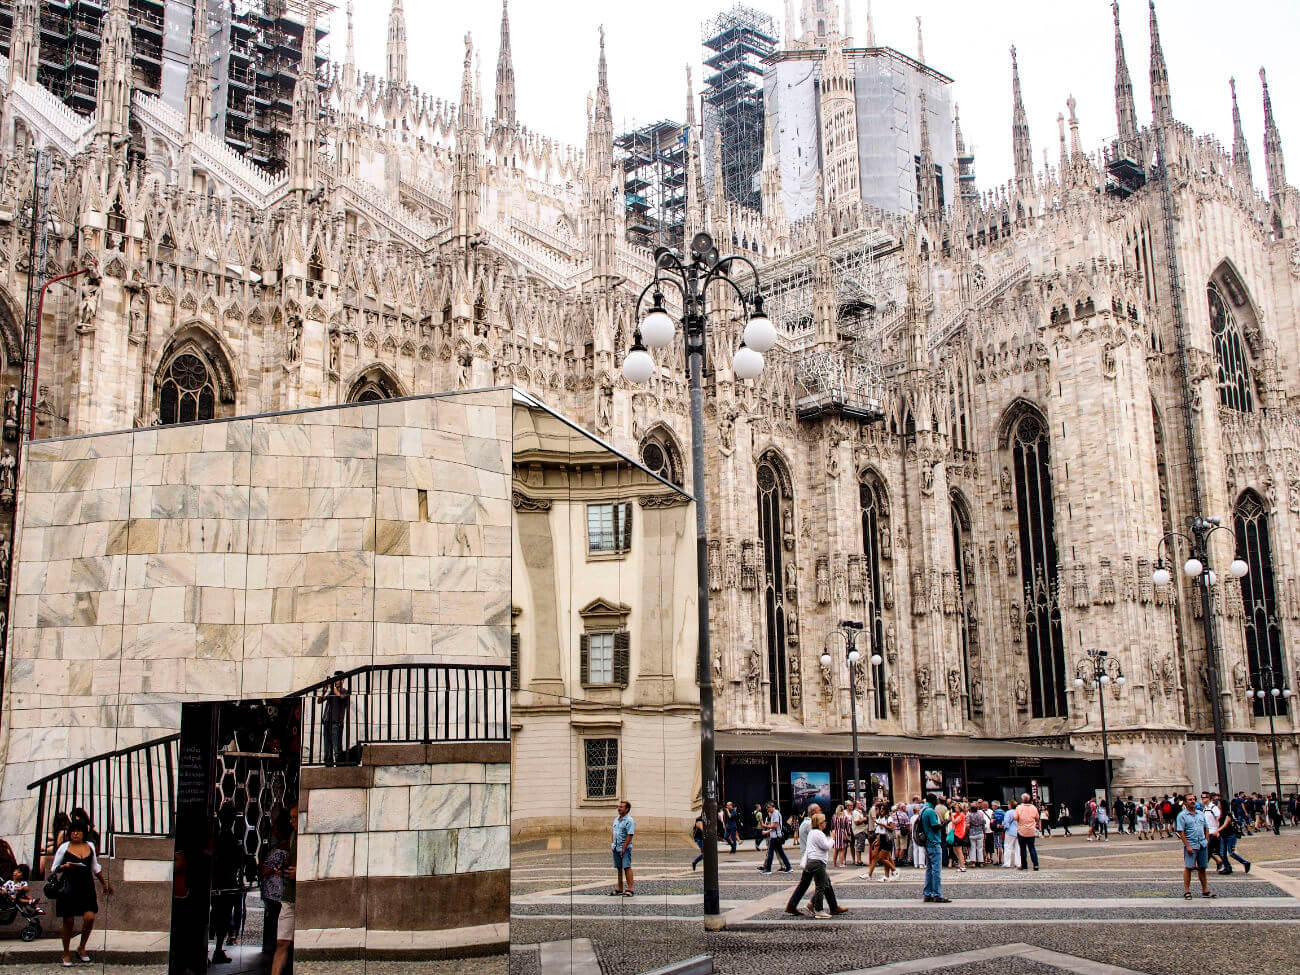 crowds and scenery, Milano